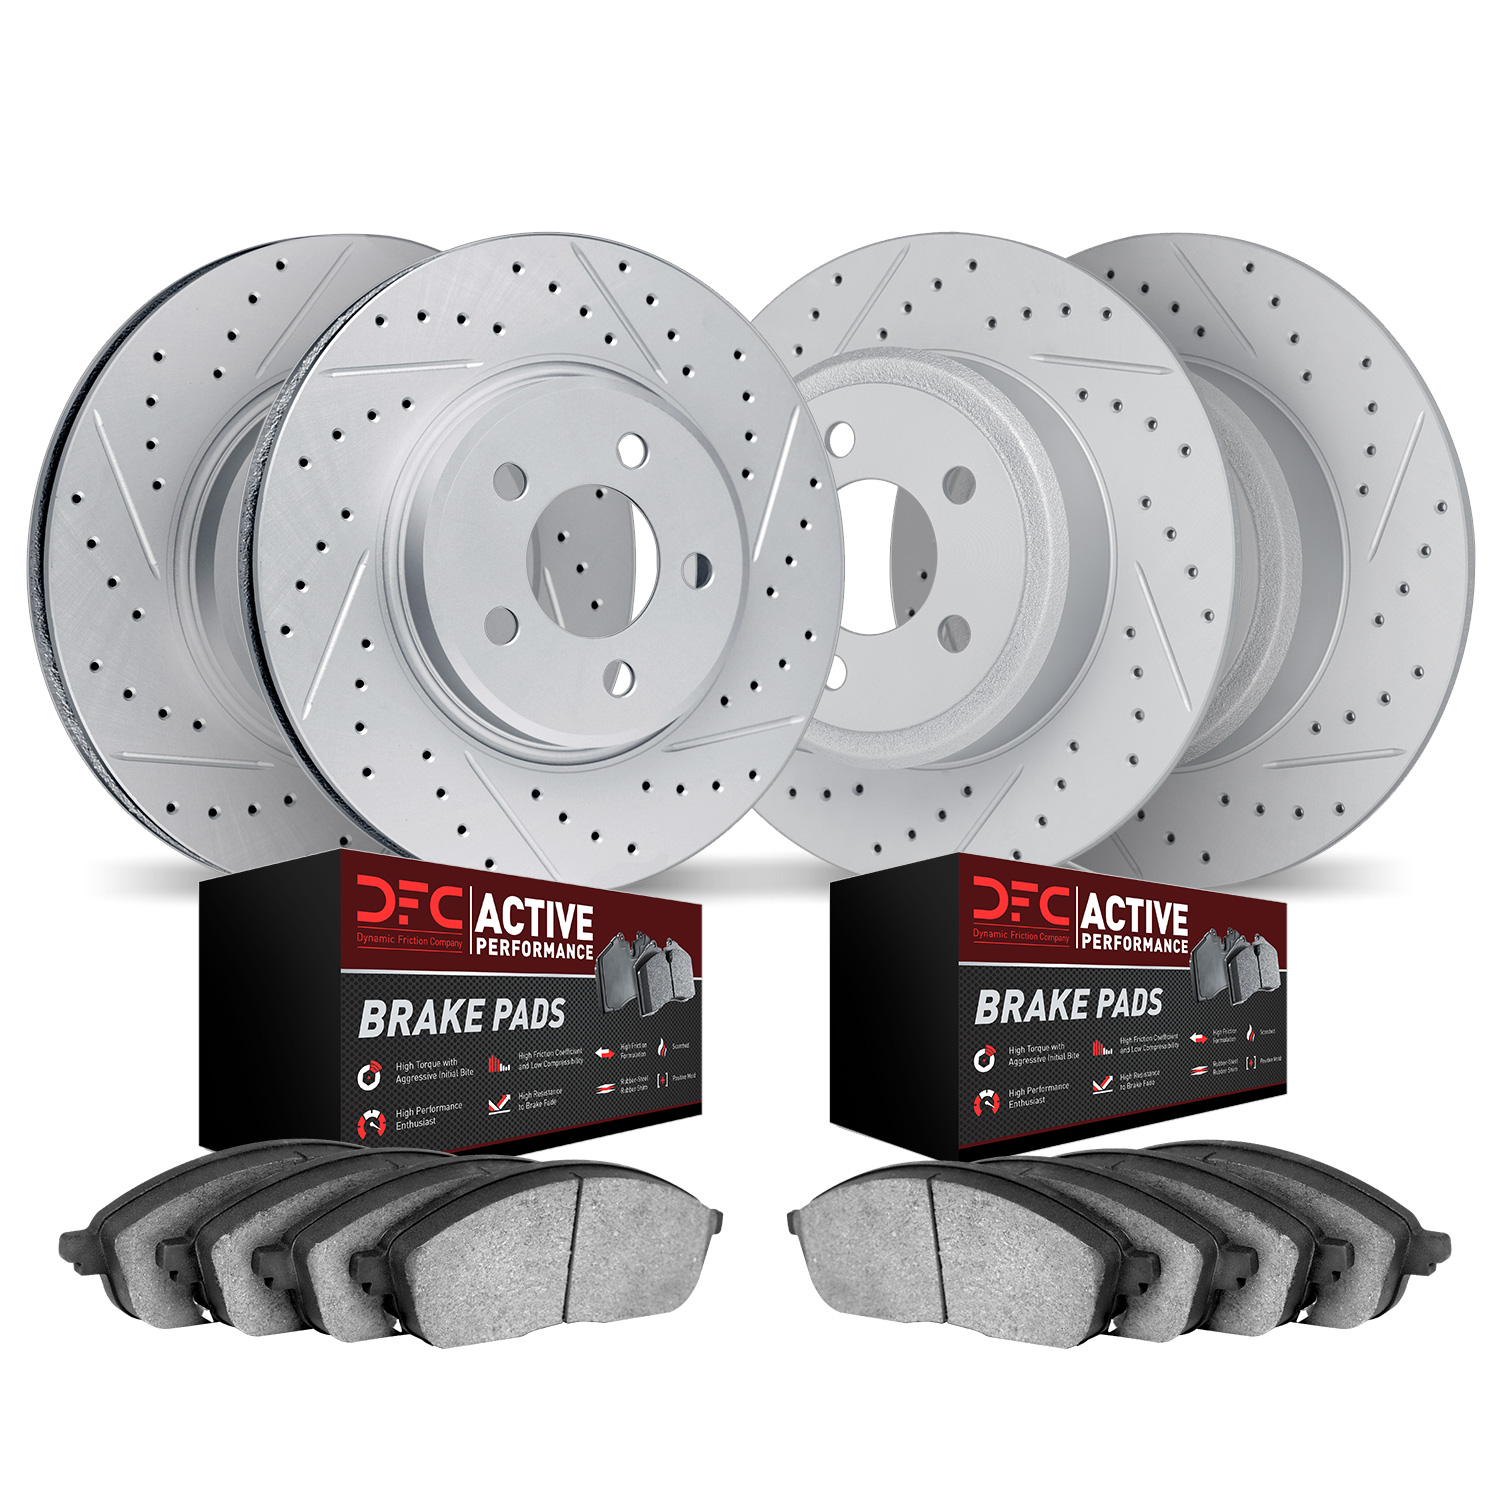 2704-72006 Geoperformance Drilled/Slotted Brake Rotors with Active Performance Pads Kit, 1994-2000 Multiple Makes/Models, Positi